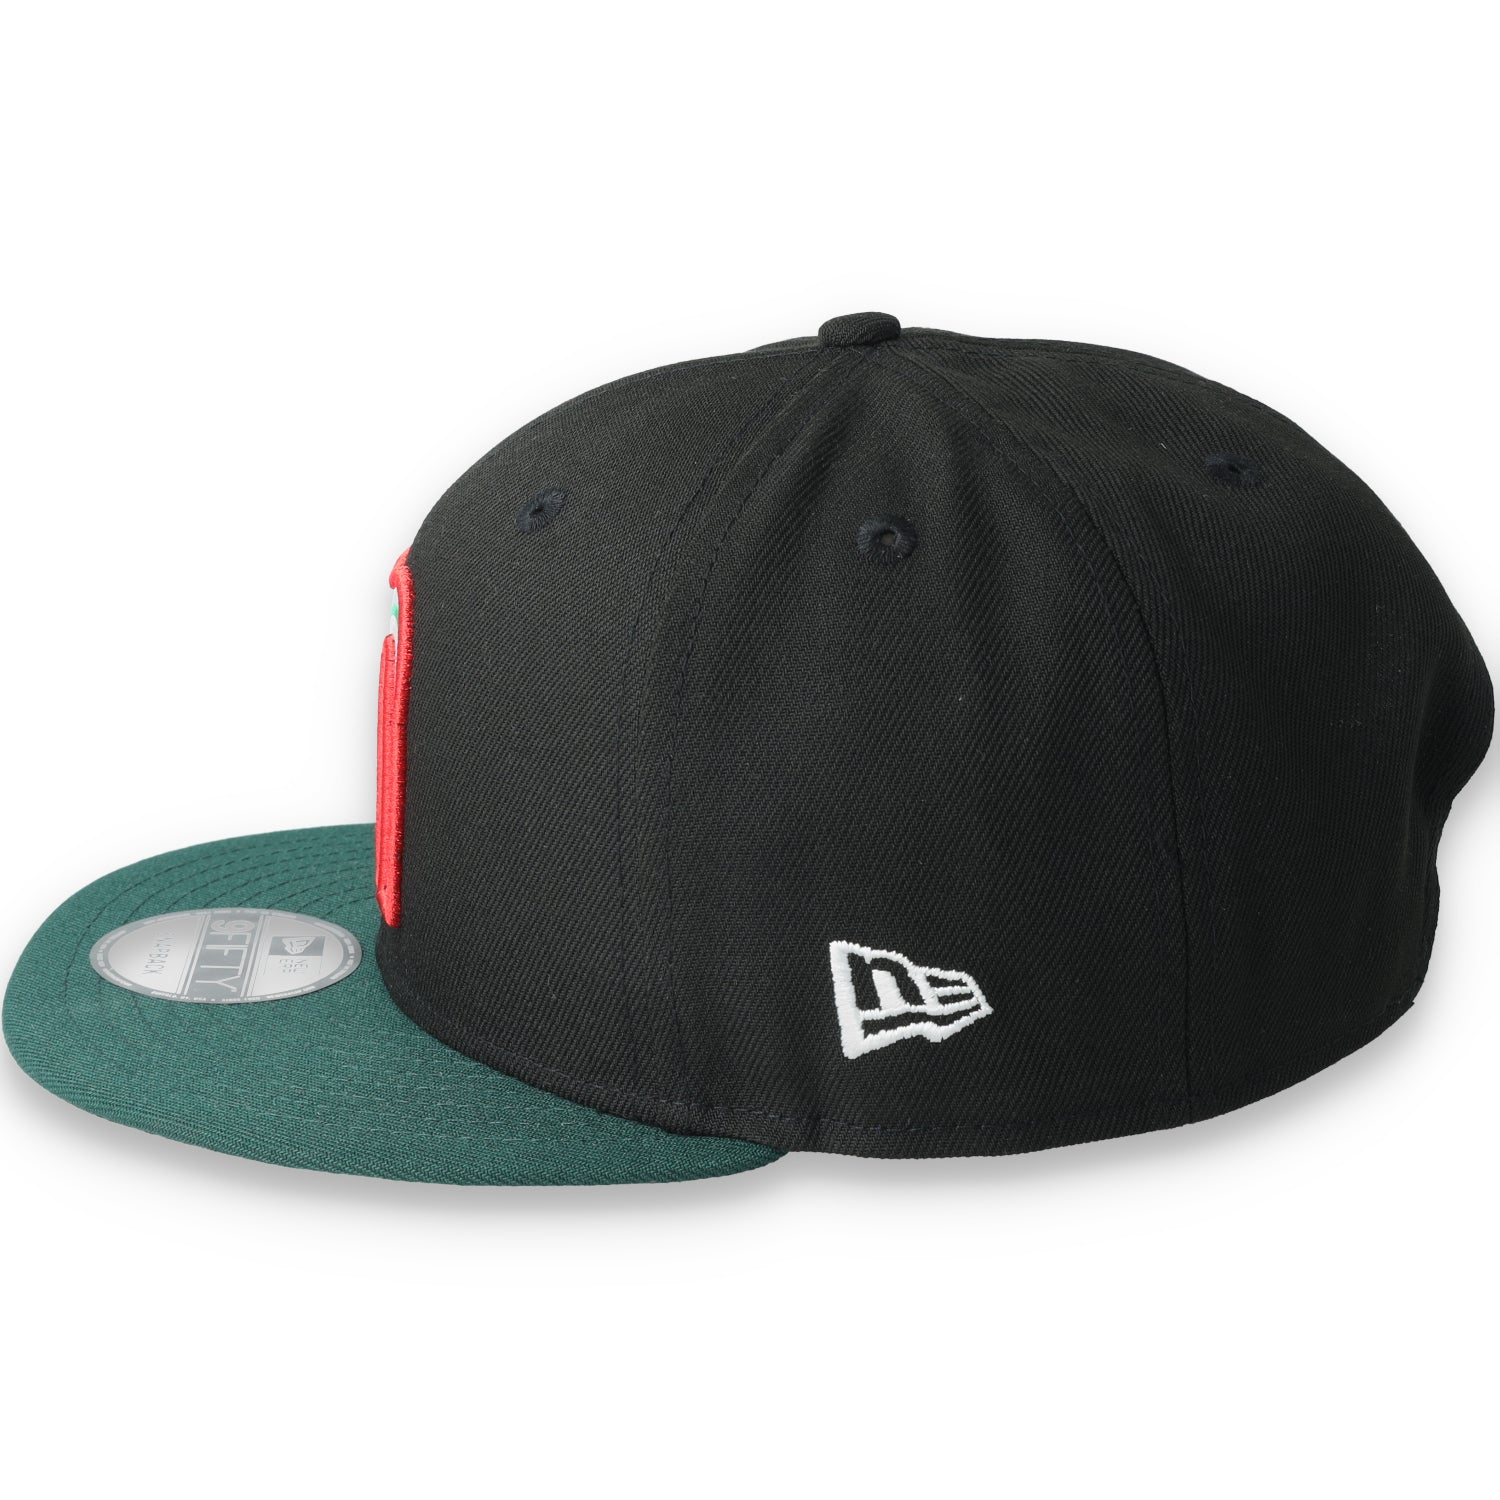 NEW ERA OFFICIAL MEXICO 9FIFTY SNAPBACK HAT-BLACK